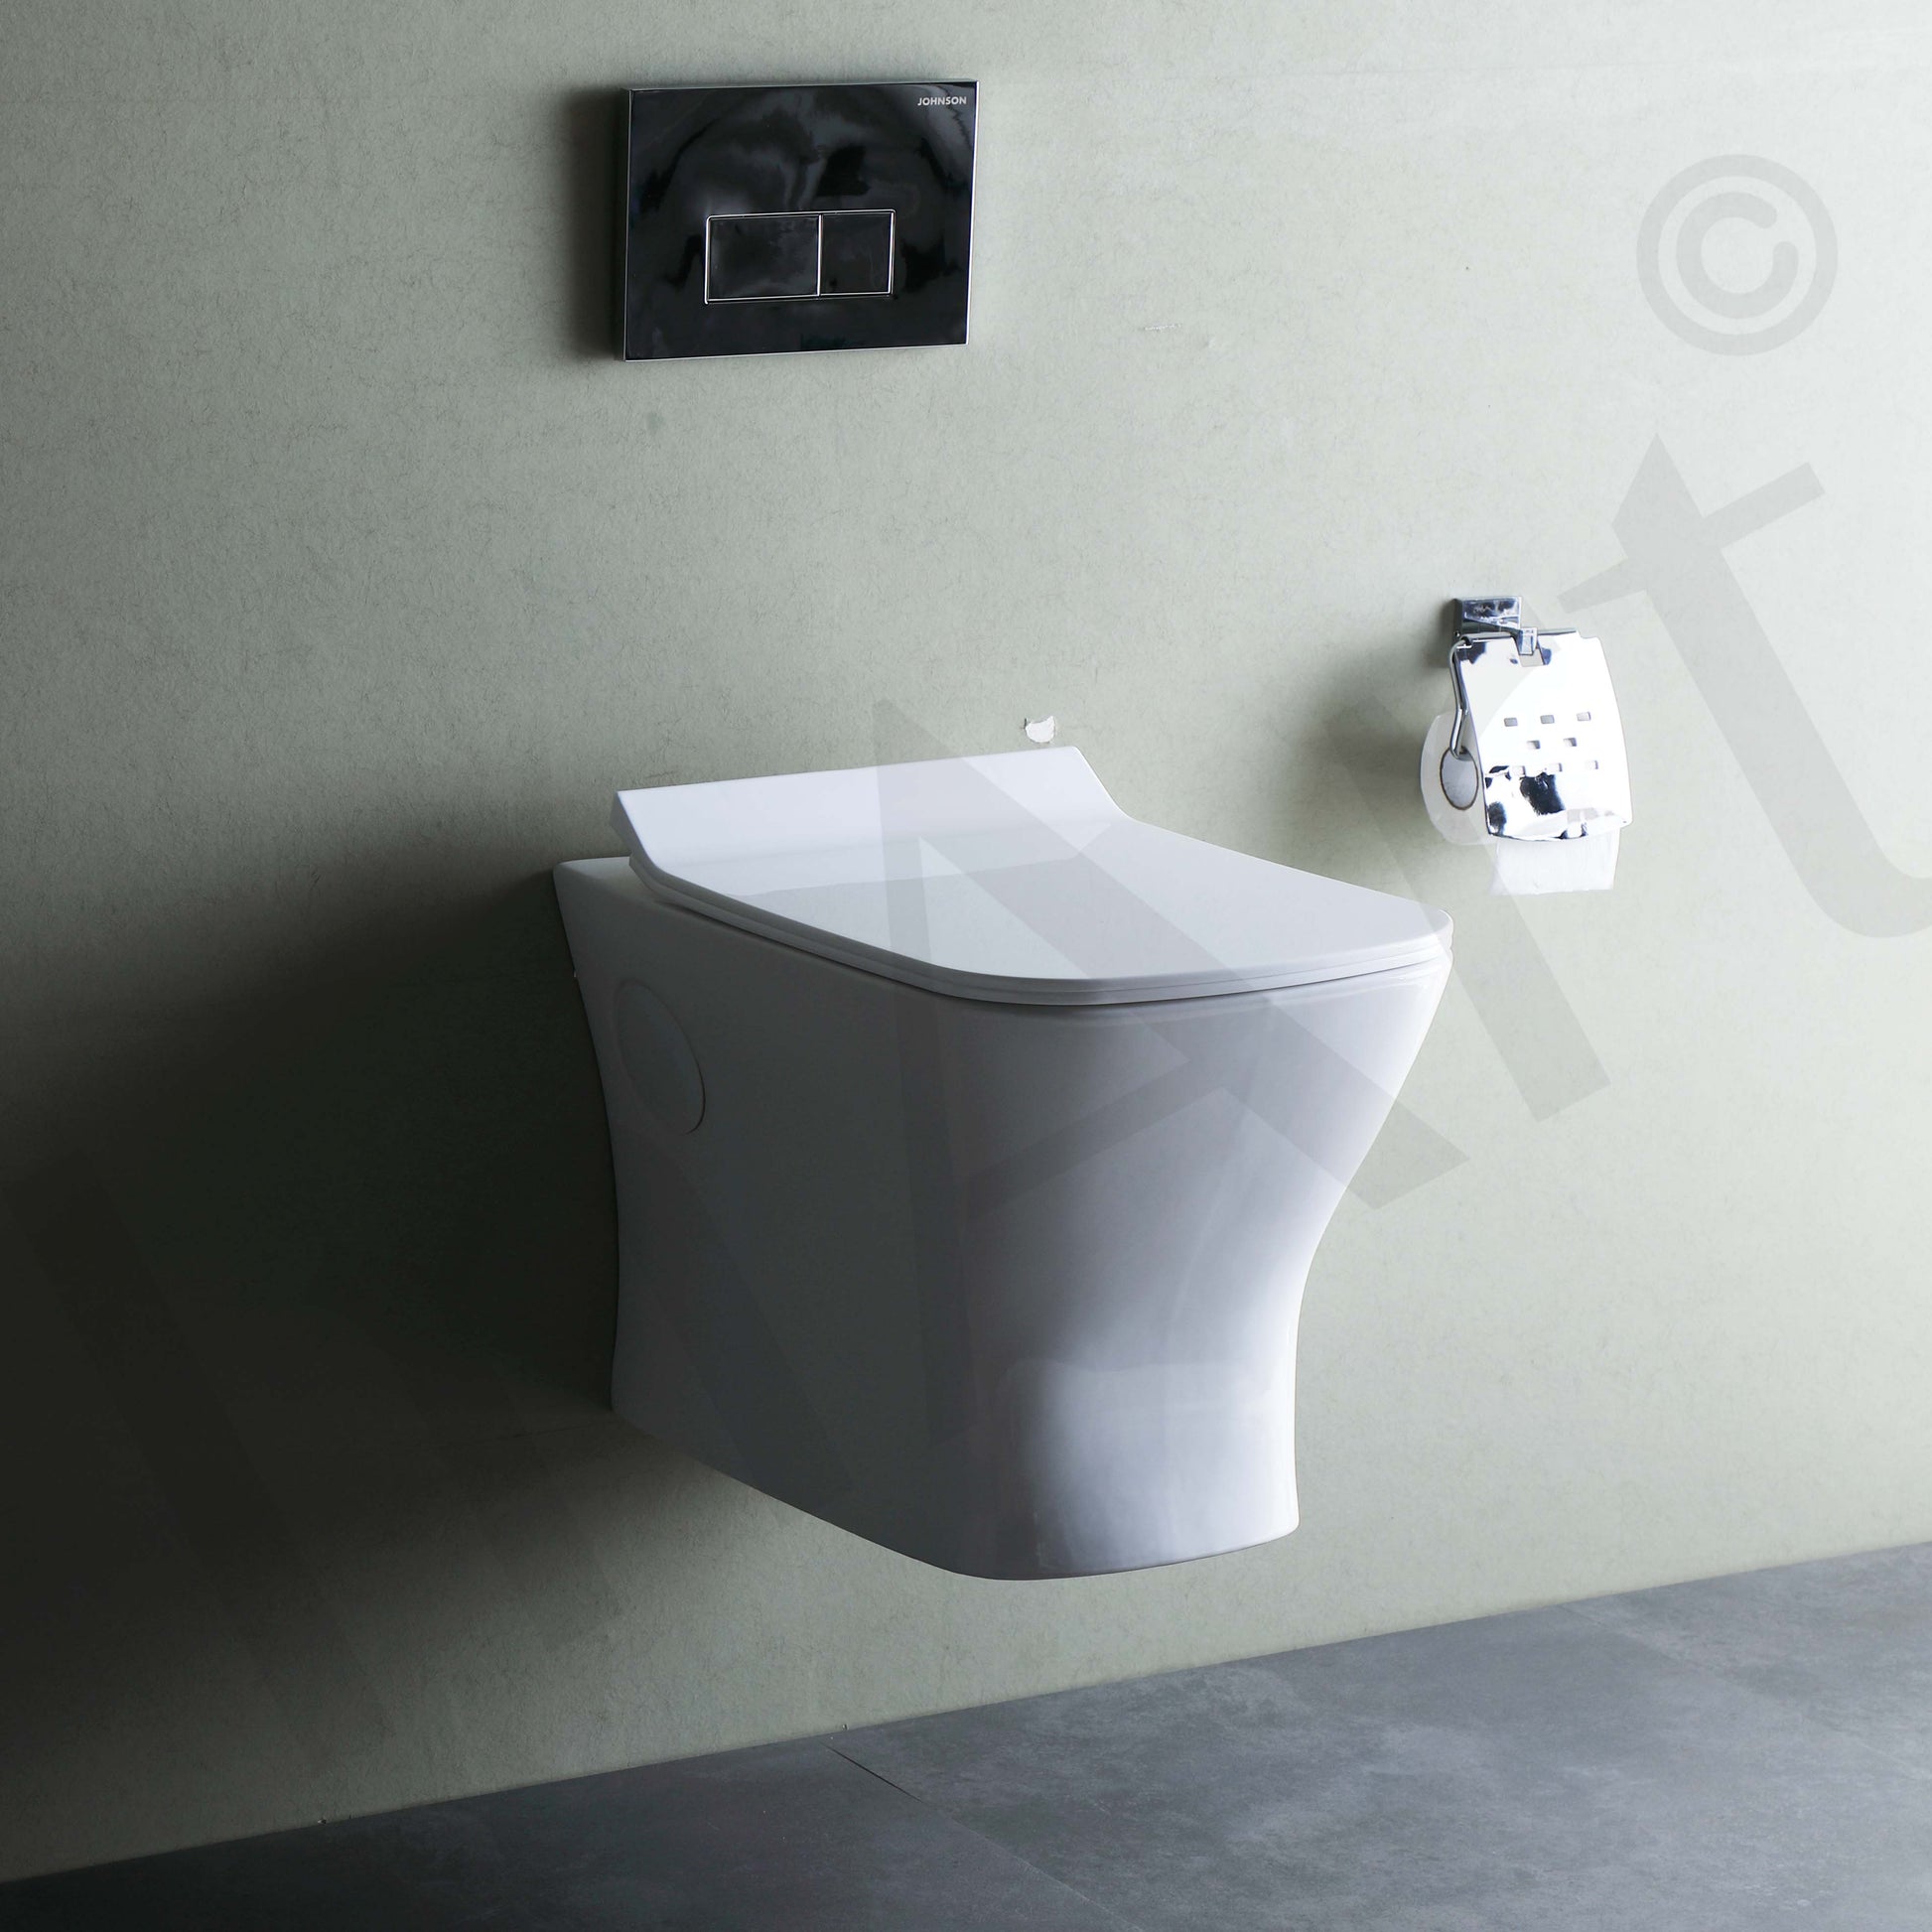 InArt Ceramic Wall Hung or Wall Mounted Designer Water Closet Toilet with Soft Seat Cover White Color - InArt-Studio